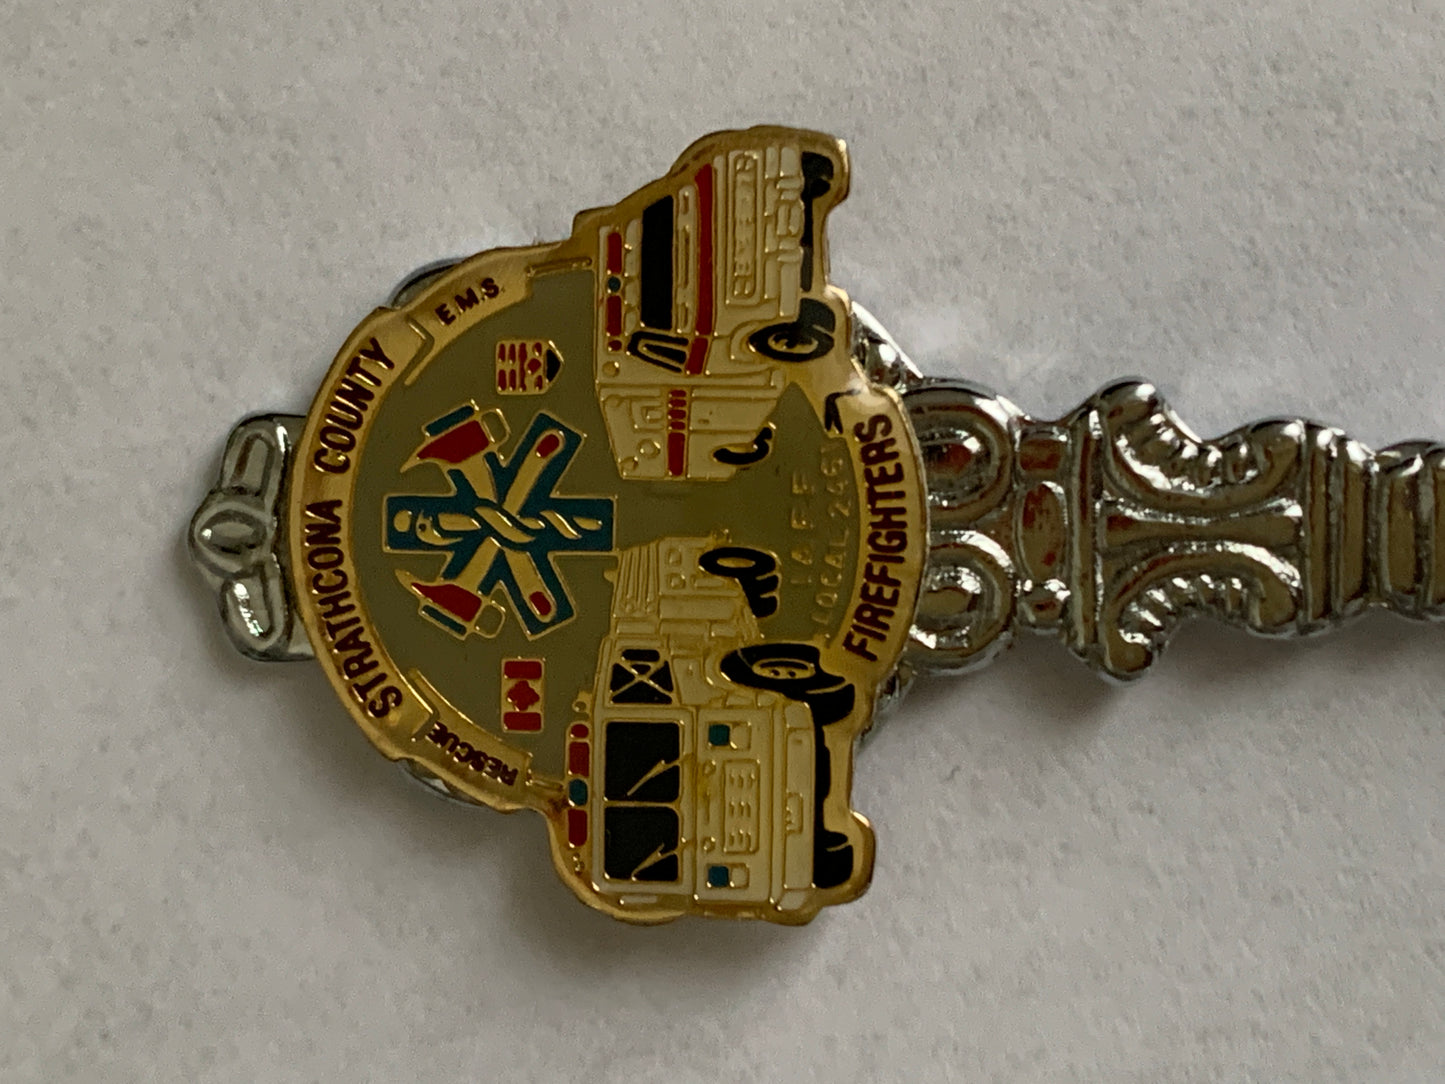 Vintage Collector Spoon Strathcona County Firefighters Commemorative Collector Spoon